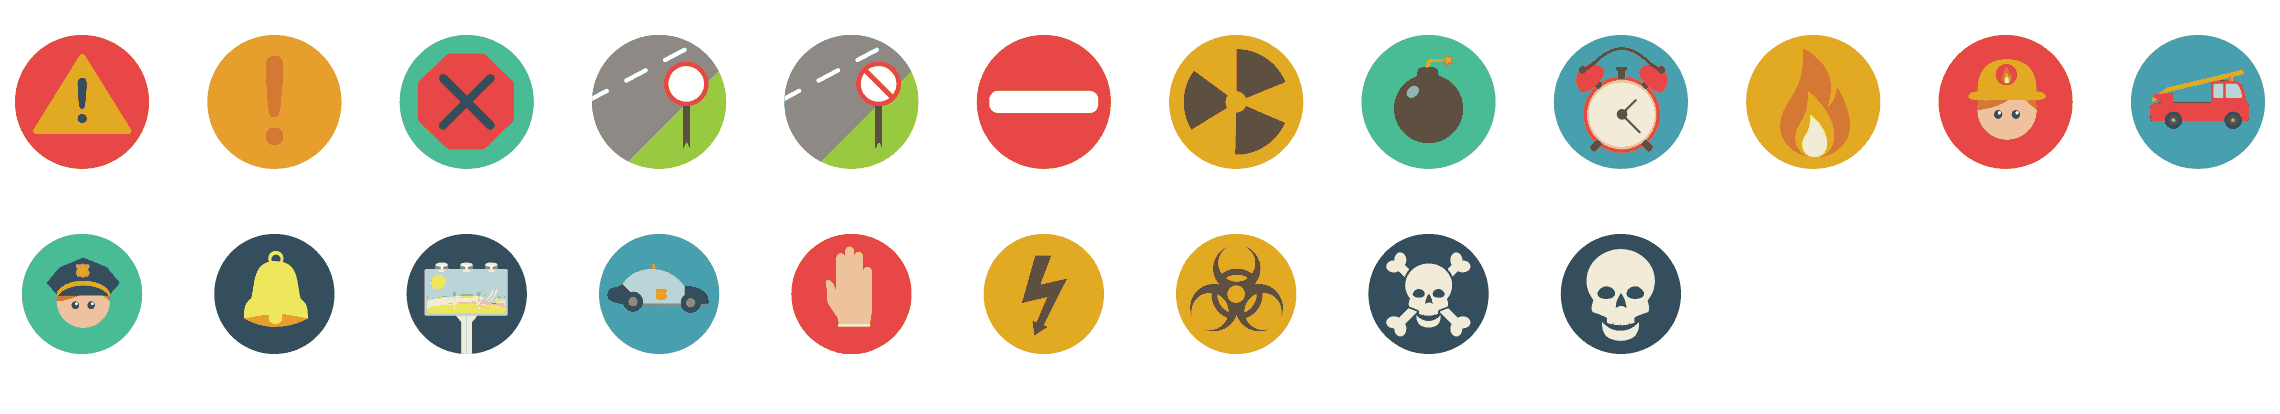 Alerts-flat-icons-vol-1-preview